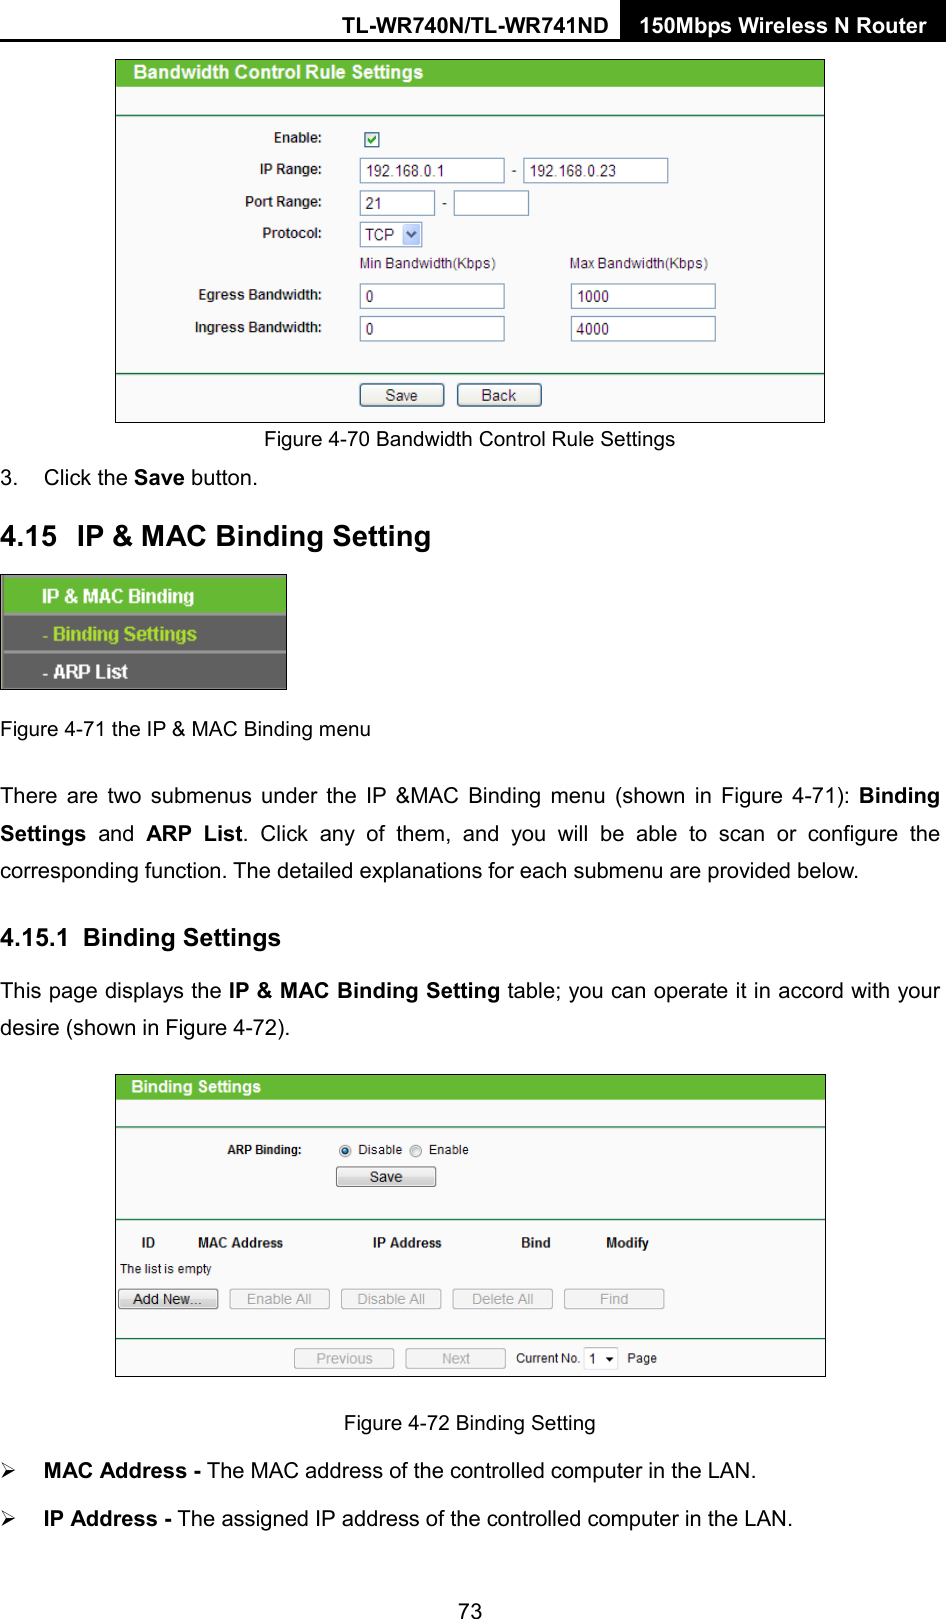 TL-WR740N/TL-WR741ND 150Mbps Wireless N Router   Figure 4-70 Bandwidth Control Rule Settings 3. Click the Save button. 4.15 IP &amp; MAC Binding Setting  Figure 4-71 the IP &amp; MAC Binding menu There are two submenus under the IP &amp;MAC Binding menu (shown in Figure  4-71):  Binding Settings  and ARP List. Click any of them, and you will be able to scan or configure the corresponding function. The detailed explanations for each submenu are provided below. 4.15.1 Binding Settings This page displays the IP &amp; MAC Binding Setting table; you can operate it in accord with your desire (shown in Figure 4-72).    Figure 4-72 Binding Setting  MAC Address - The MAC address of the controlled computer in the LAN.    IP Address - The assigned IP address of the controlled computer in the LAN.   73 